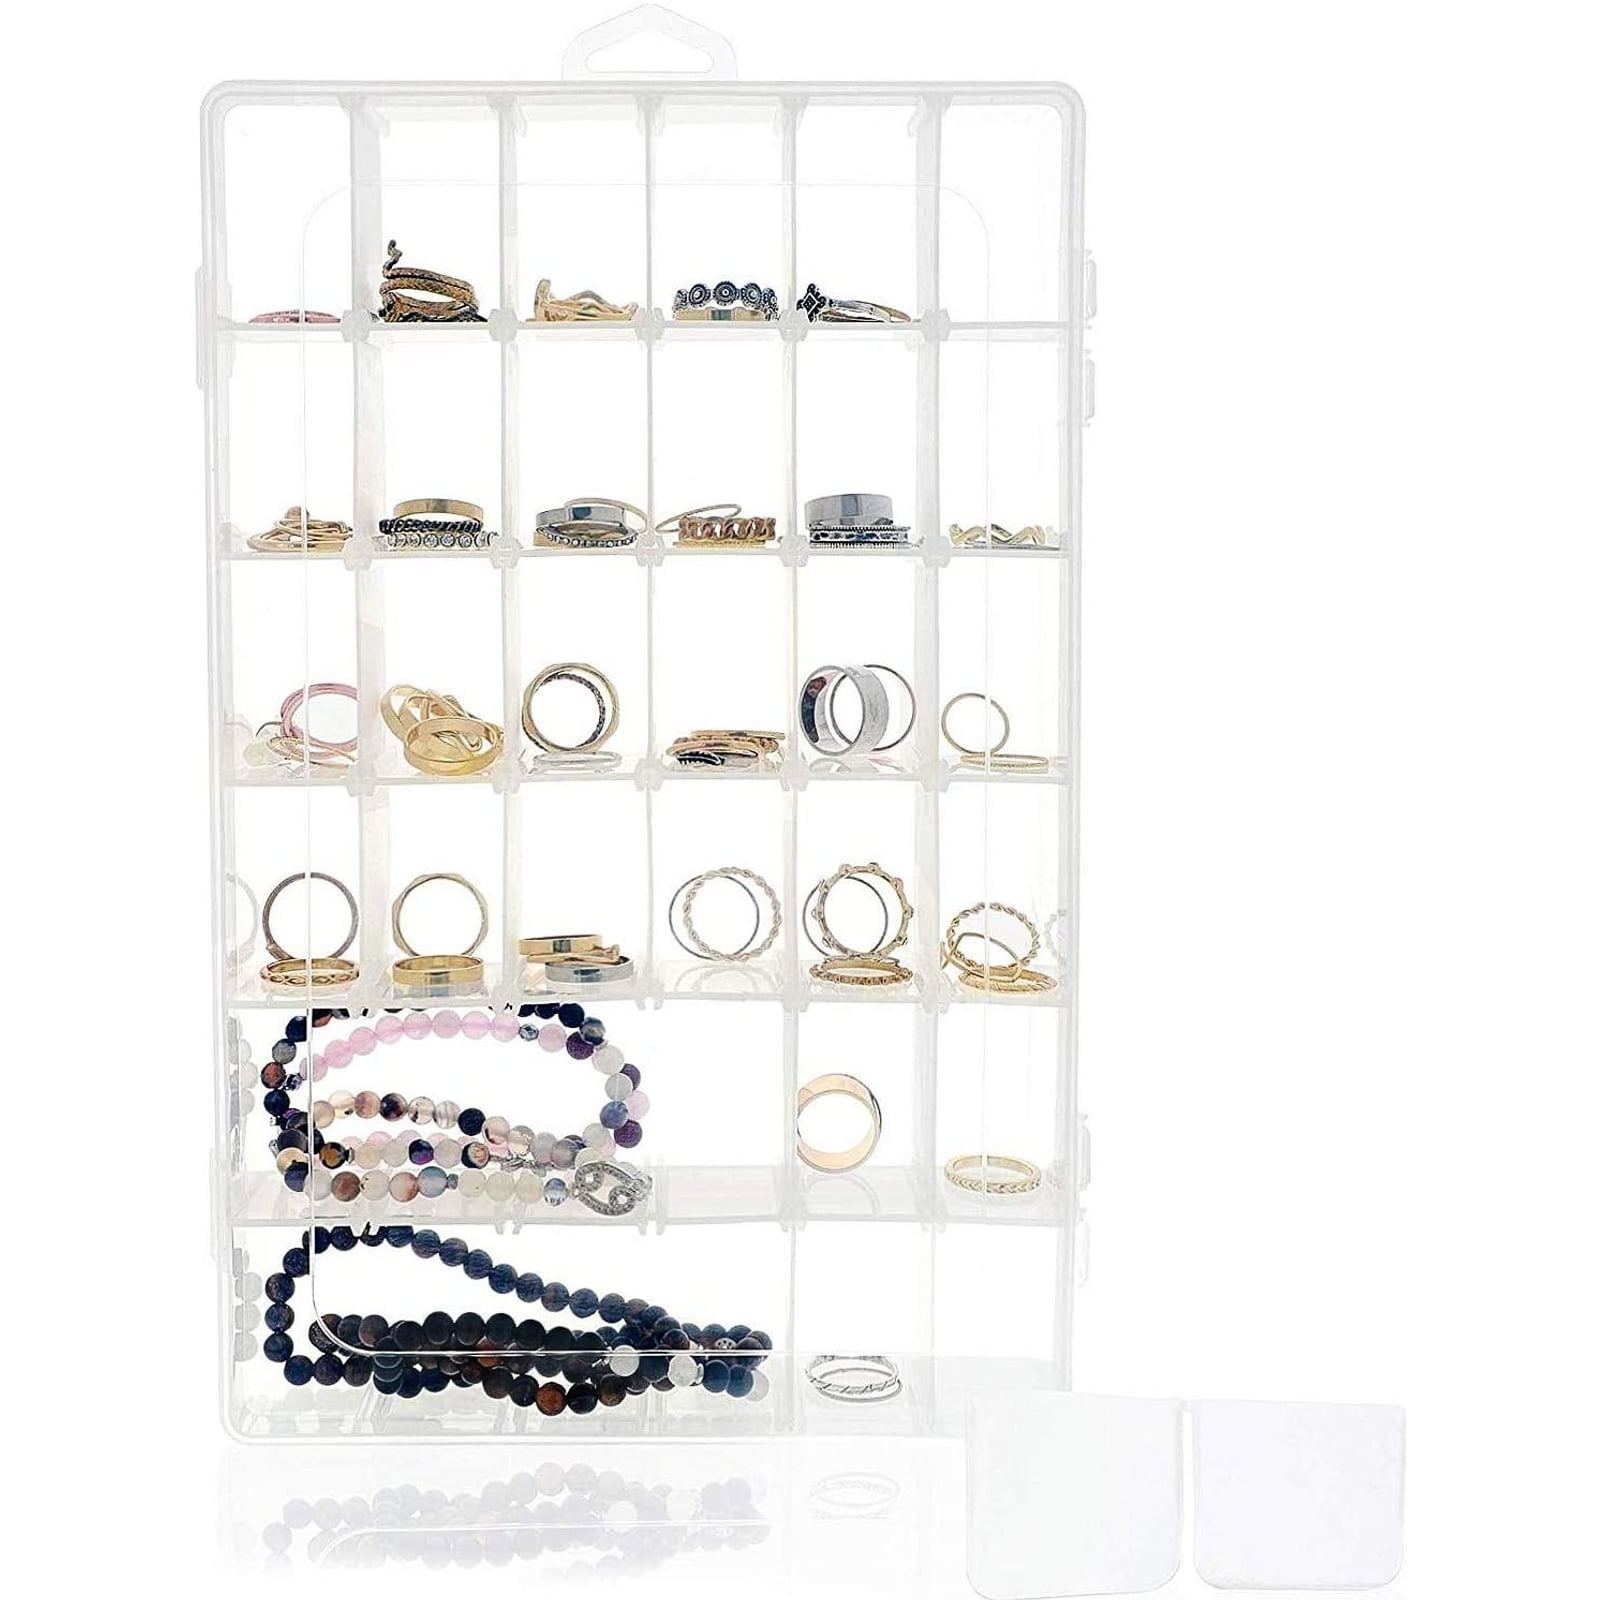 New Clear Non-Removable Plastic Organizer Beads Jewelry Finding Storage Case Box 